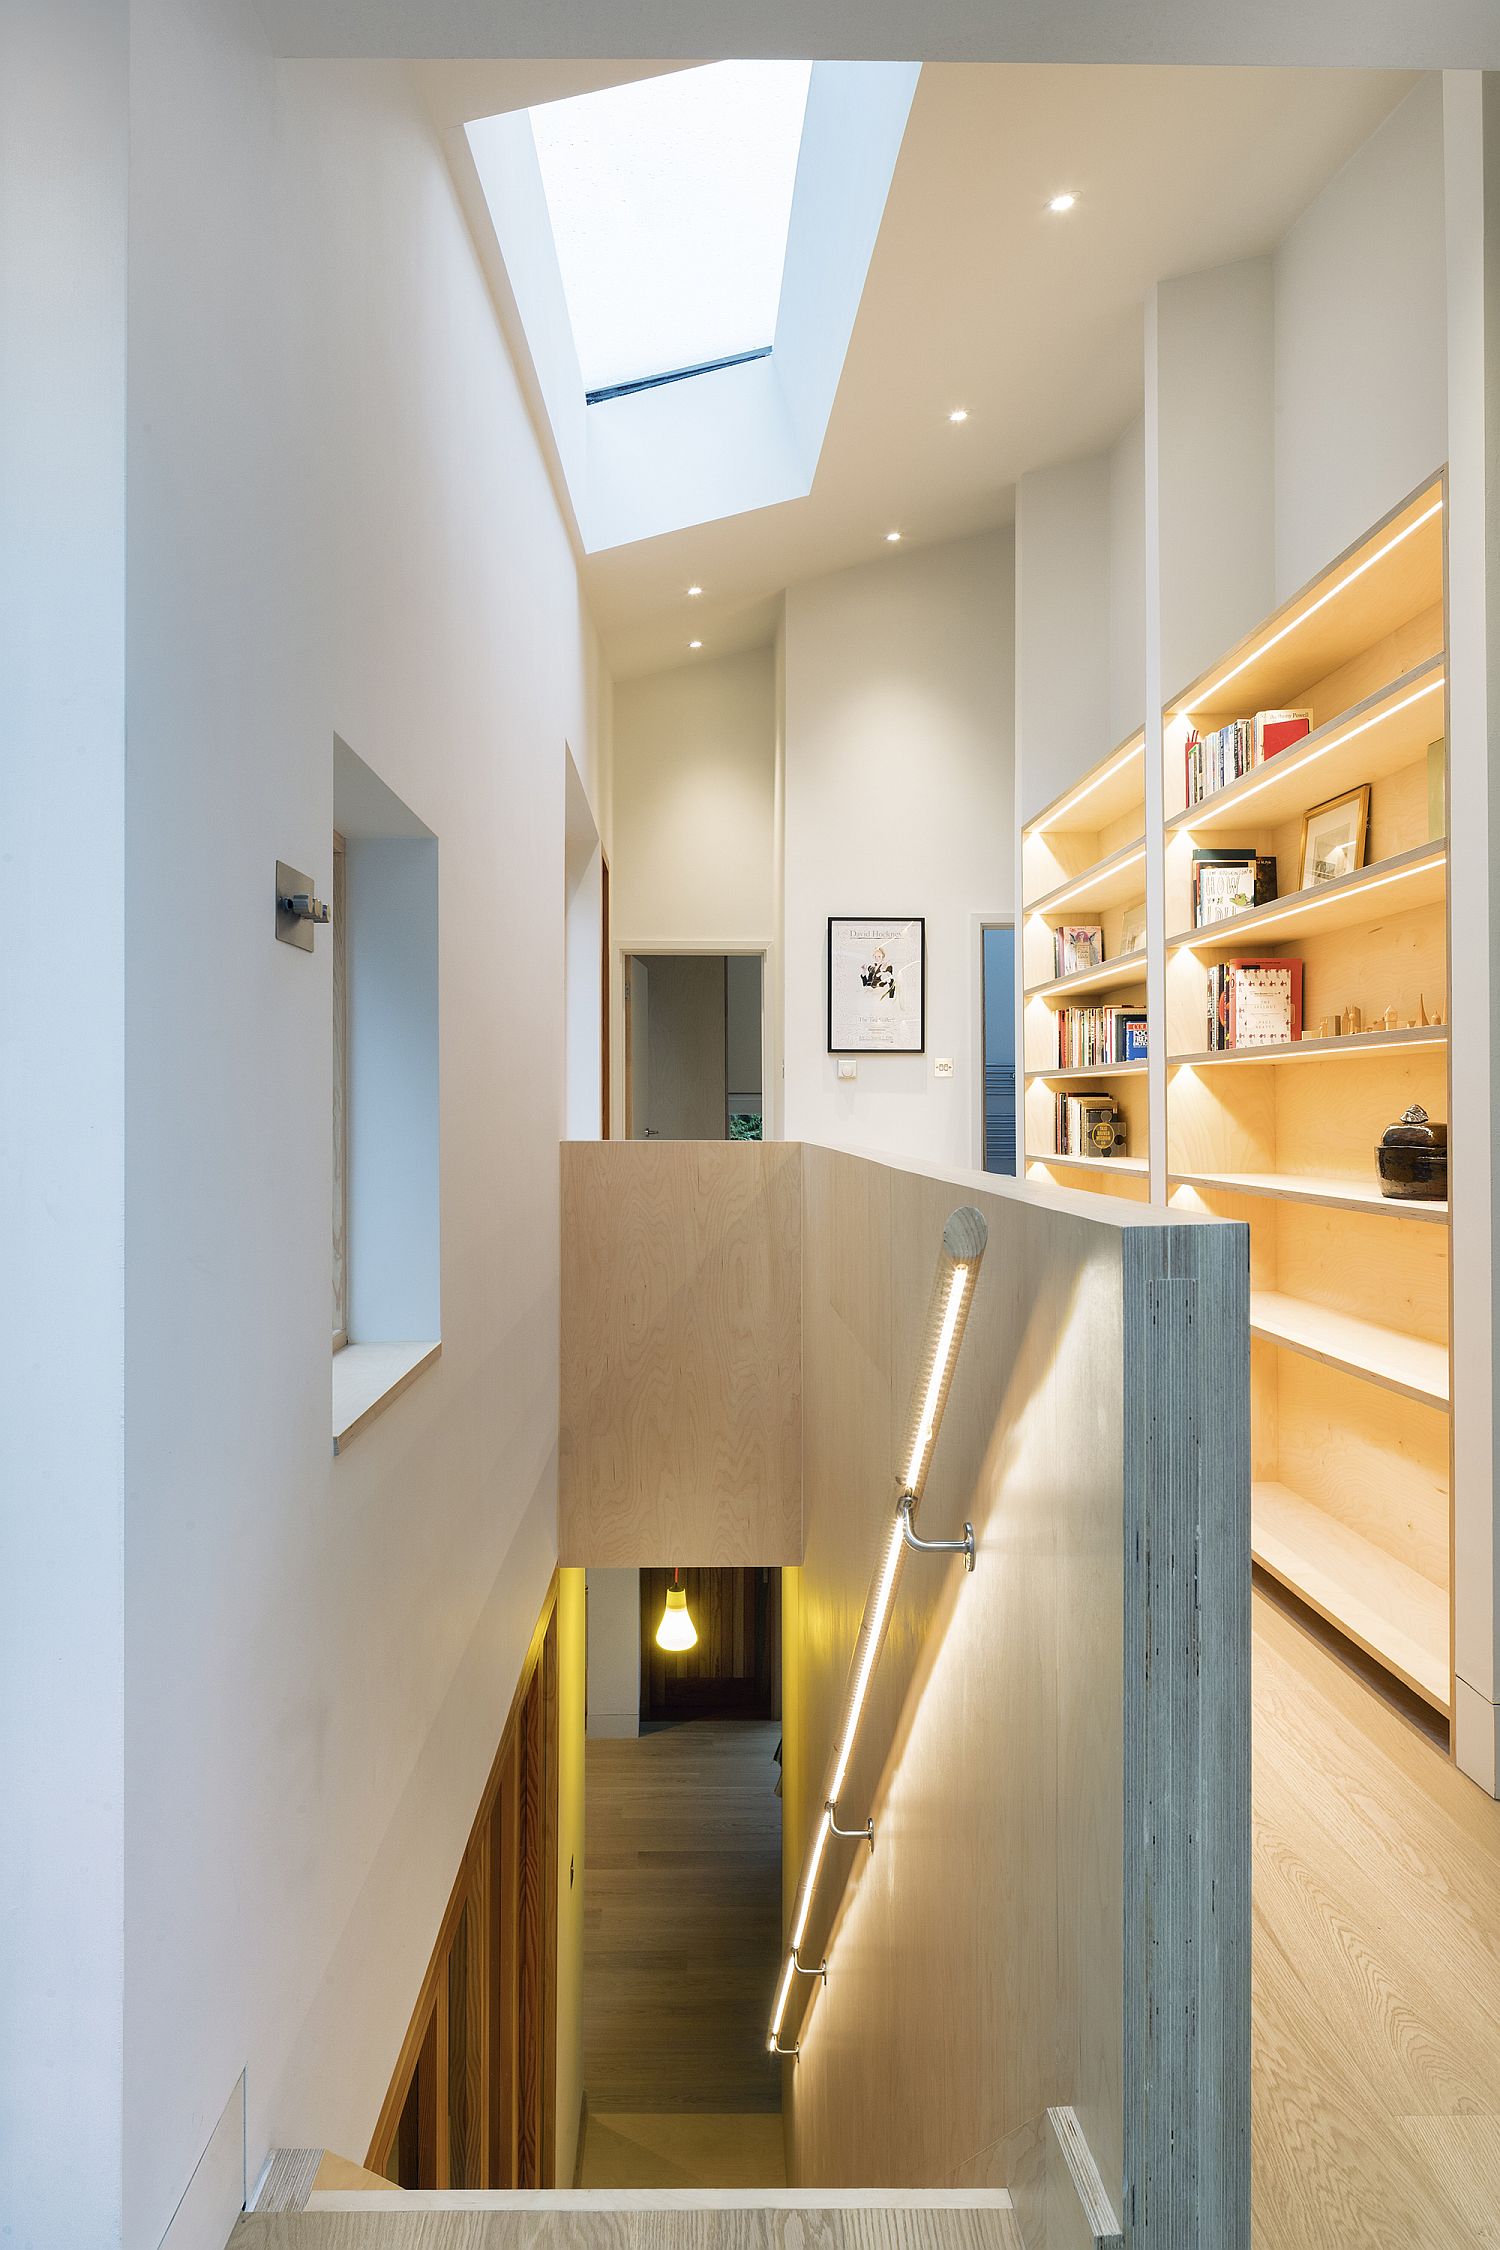 Skylight-illuminates-the-staircase-while-bringing-light-to-the-lower-level